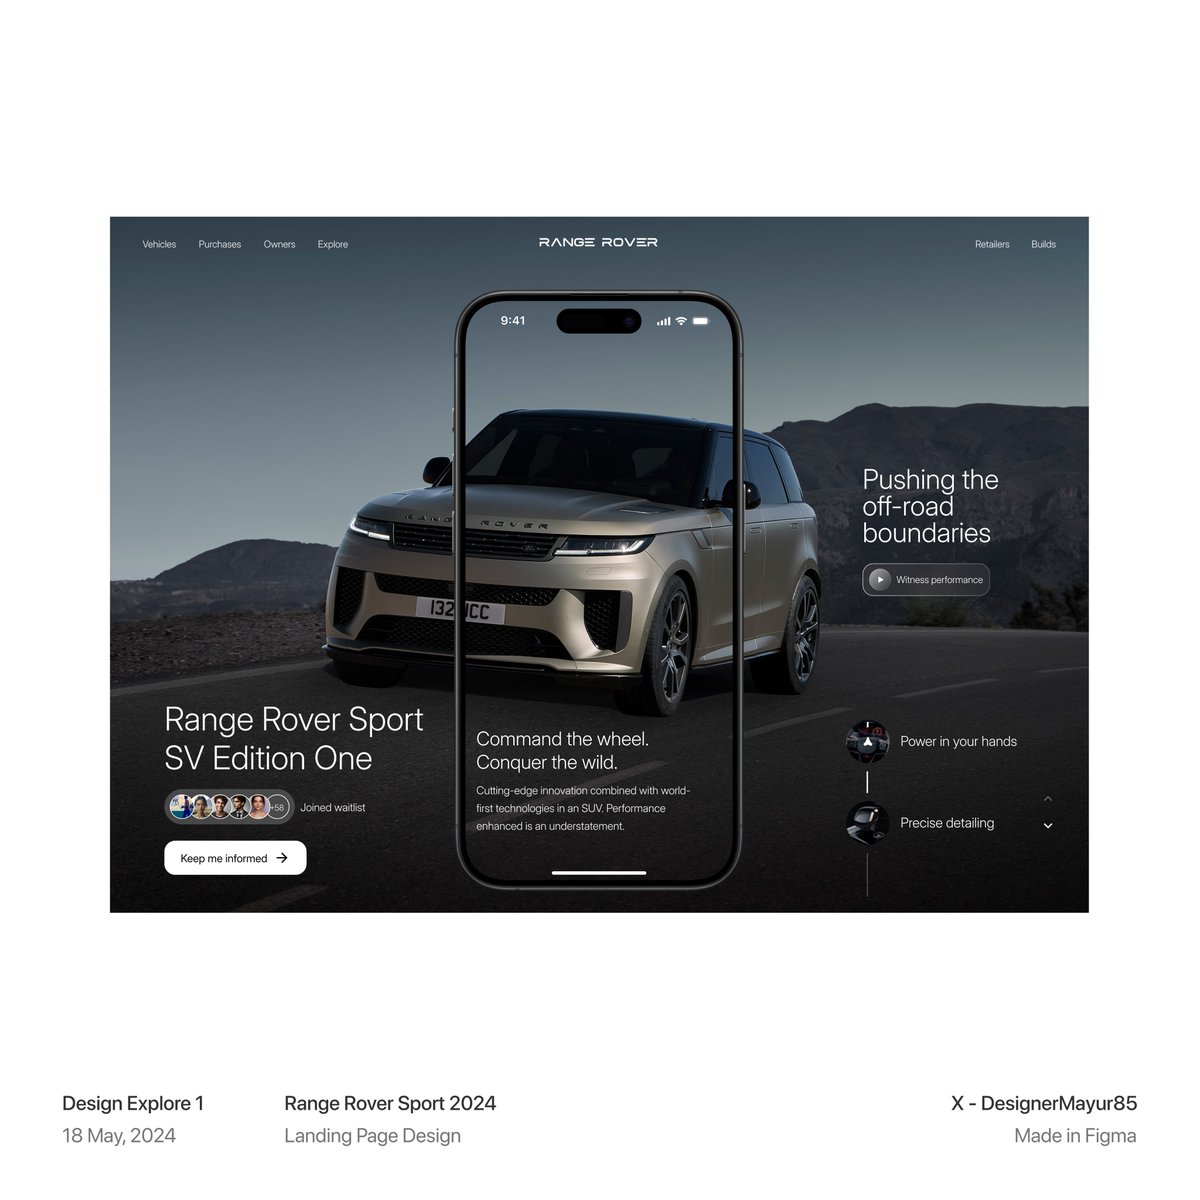 Please chose either of 2. Left or Right?

Started a new series on @figma & @framer 🤌😘

#buildinpublic #uiinspiration #uidesign #uiuxdesign #productdesign #webdesign #freelancer #rangerover